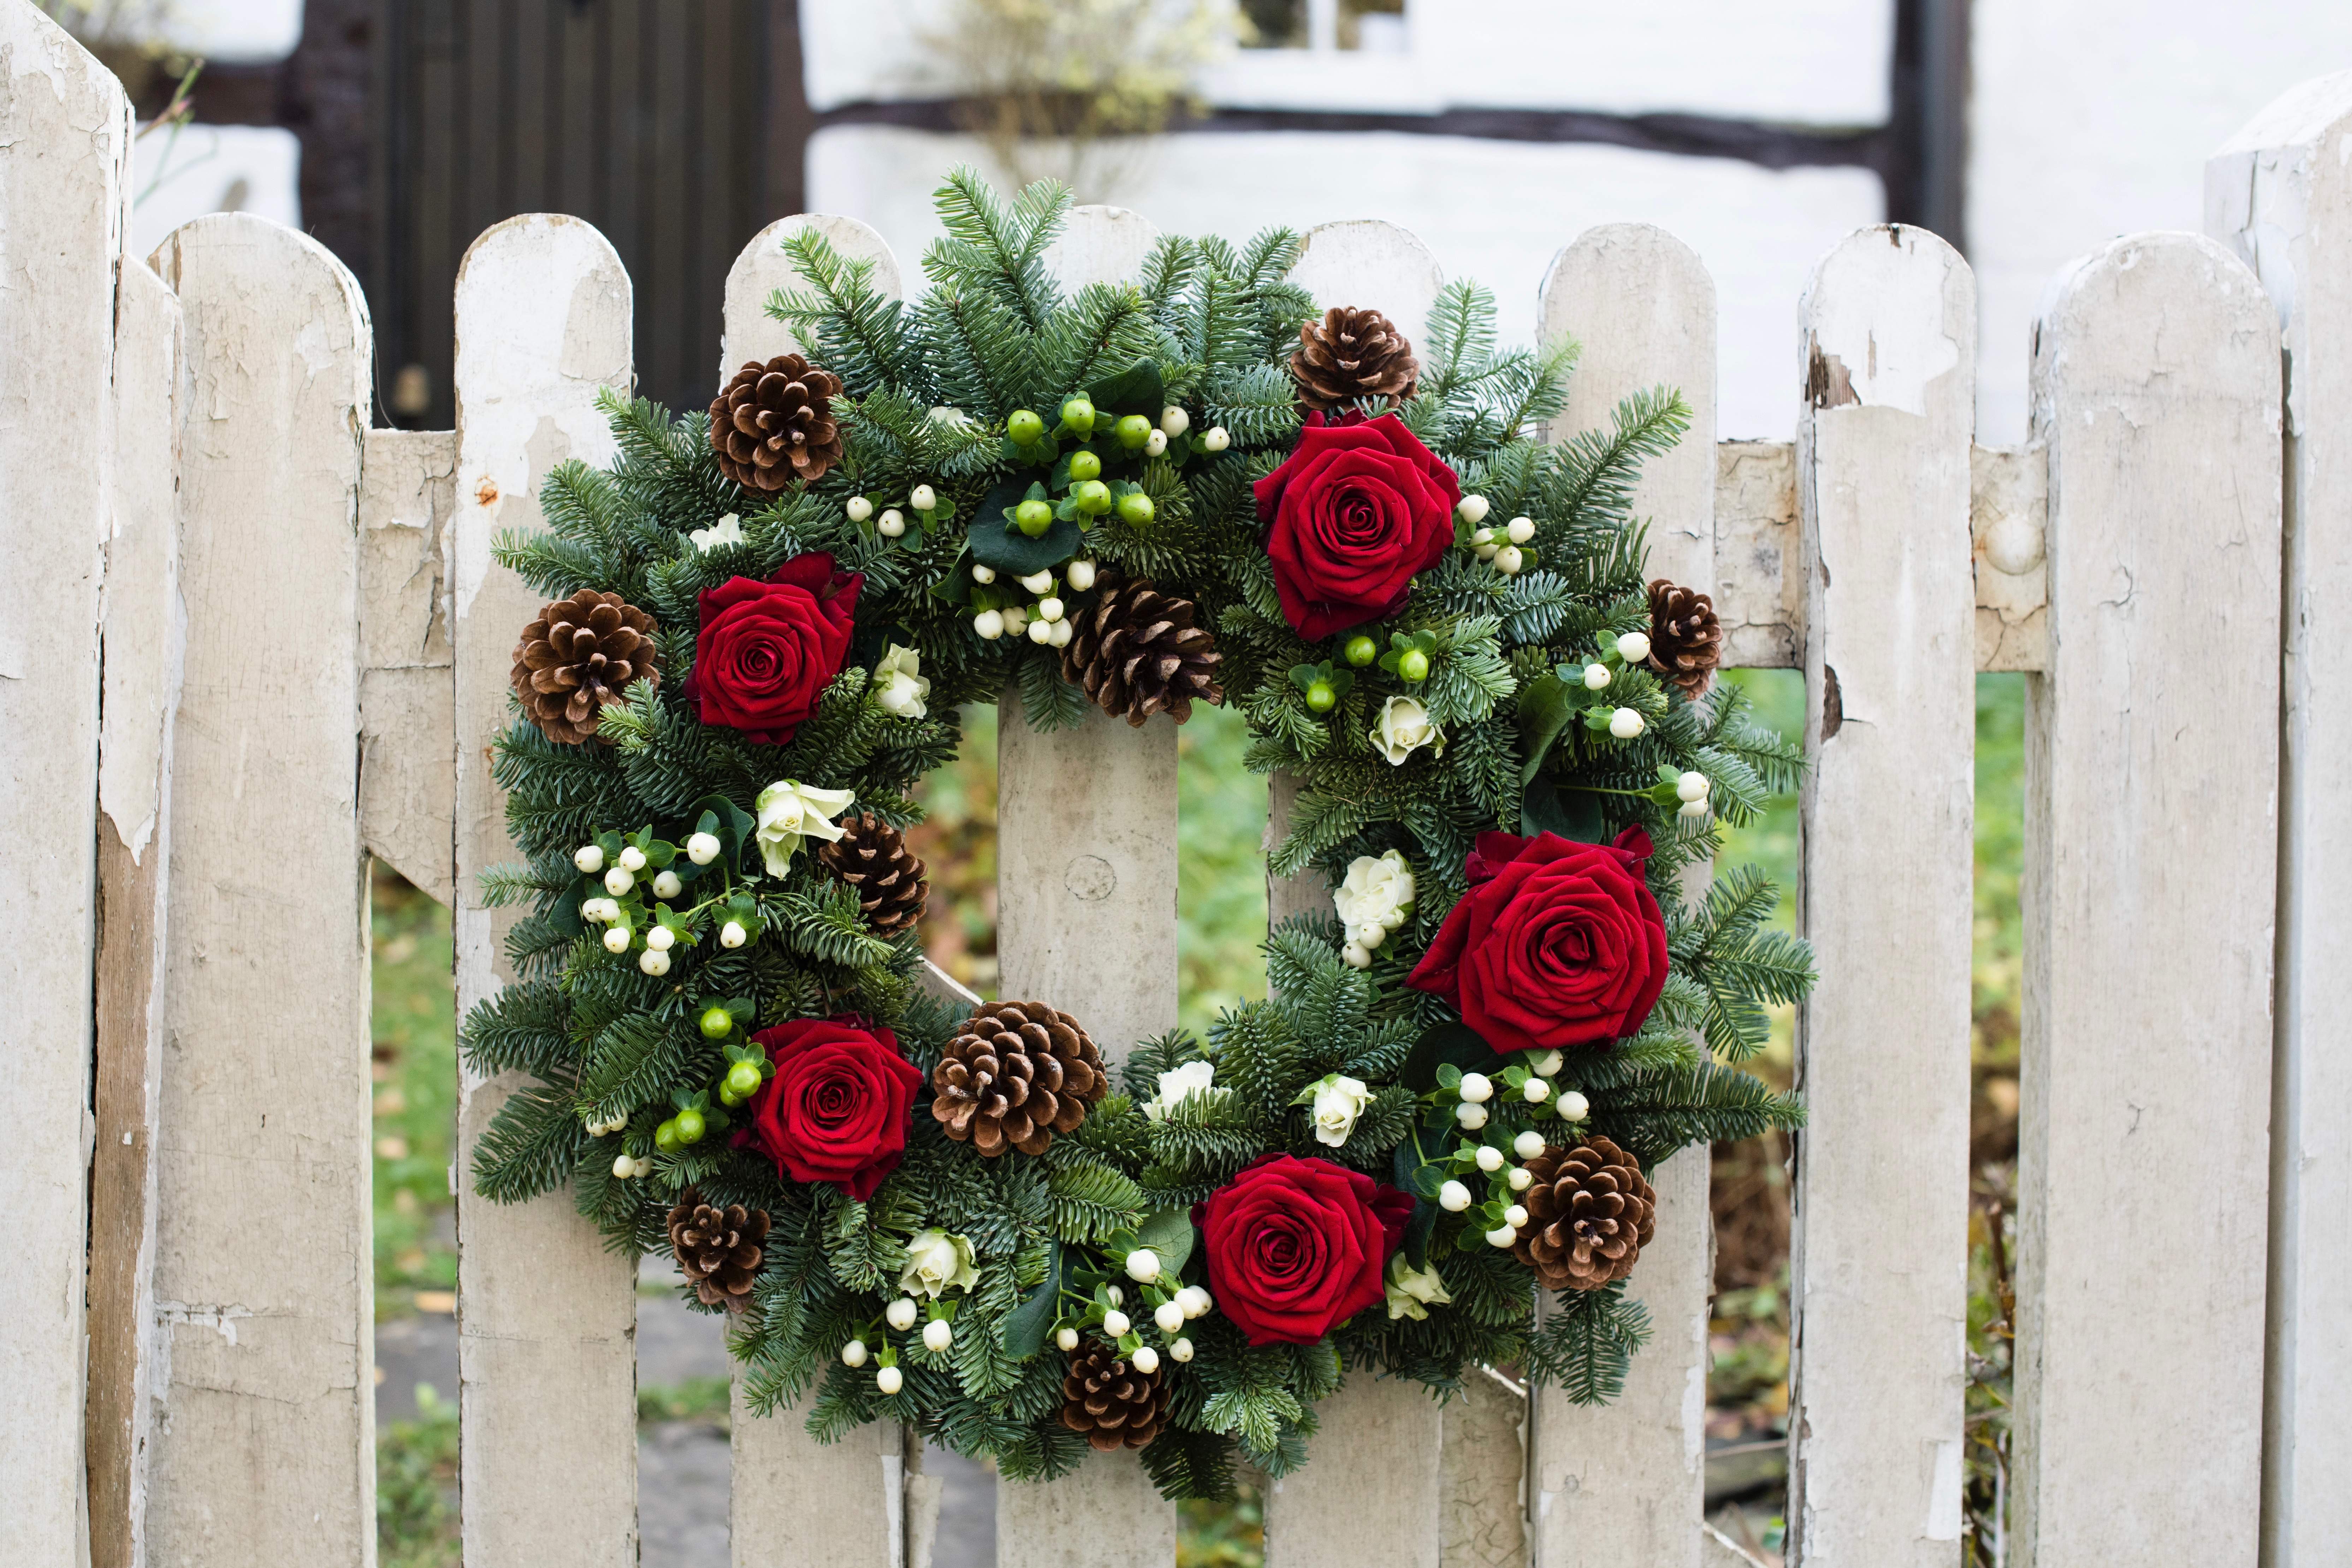 Ever wonder why we hang Christmas Wreaths on our front door?